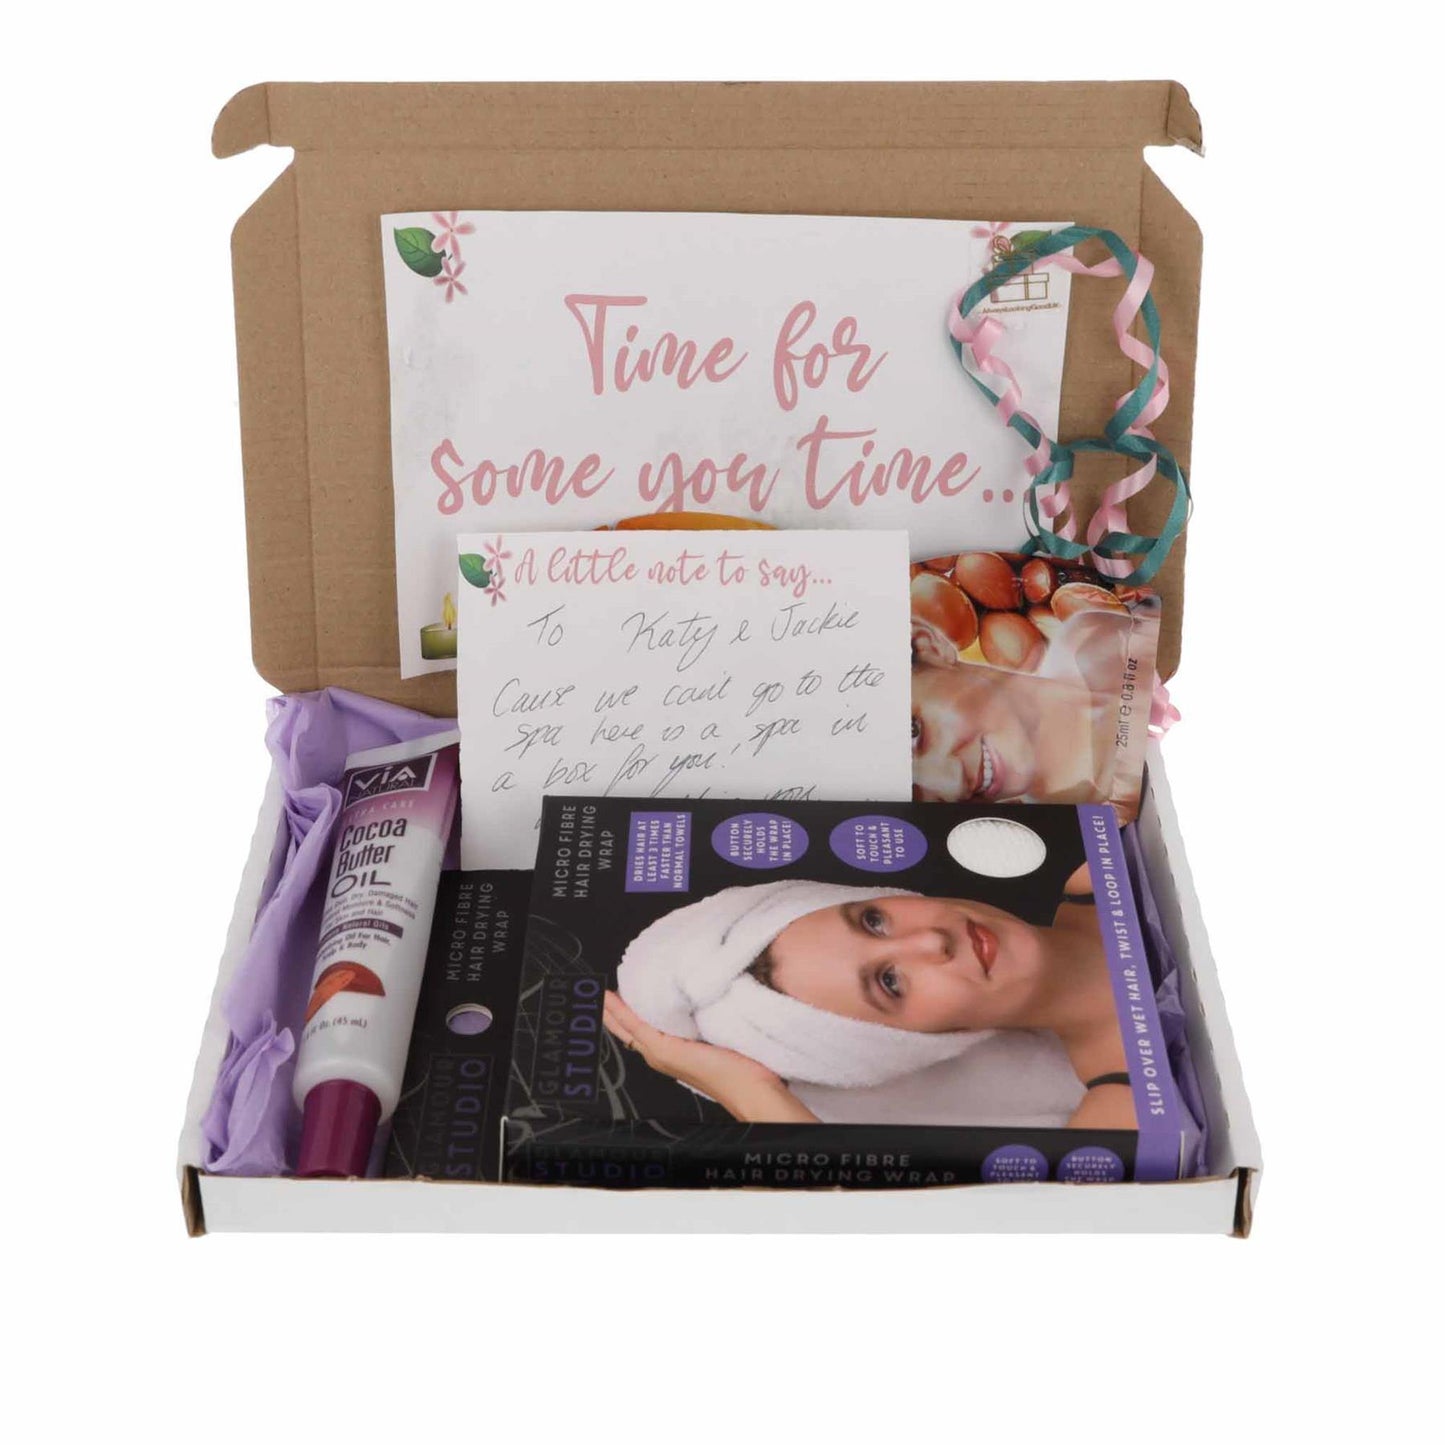 Hair Care Pamper Hamper Letterbox Gift Box  - Always Looking Good -   